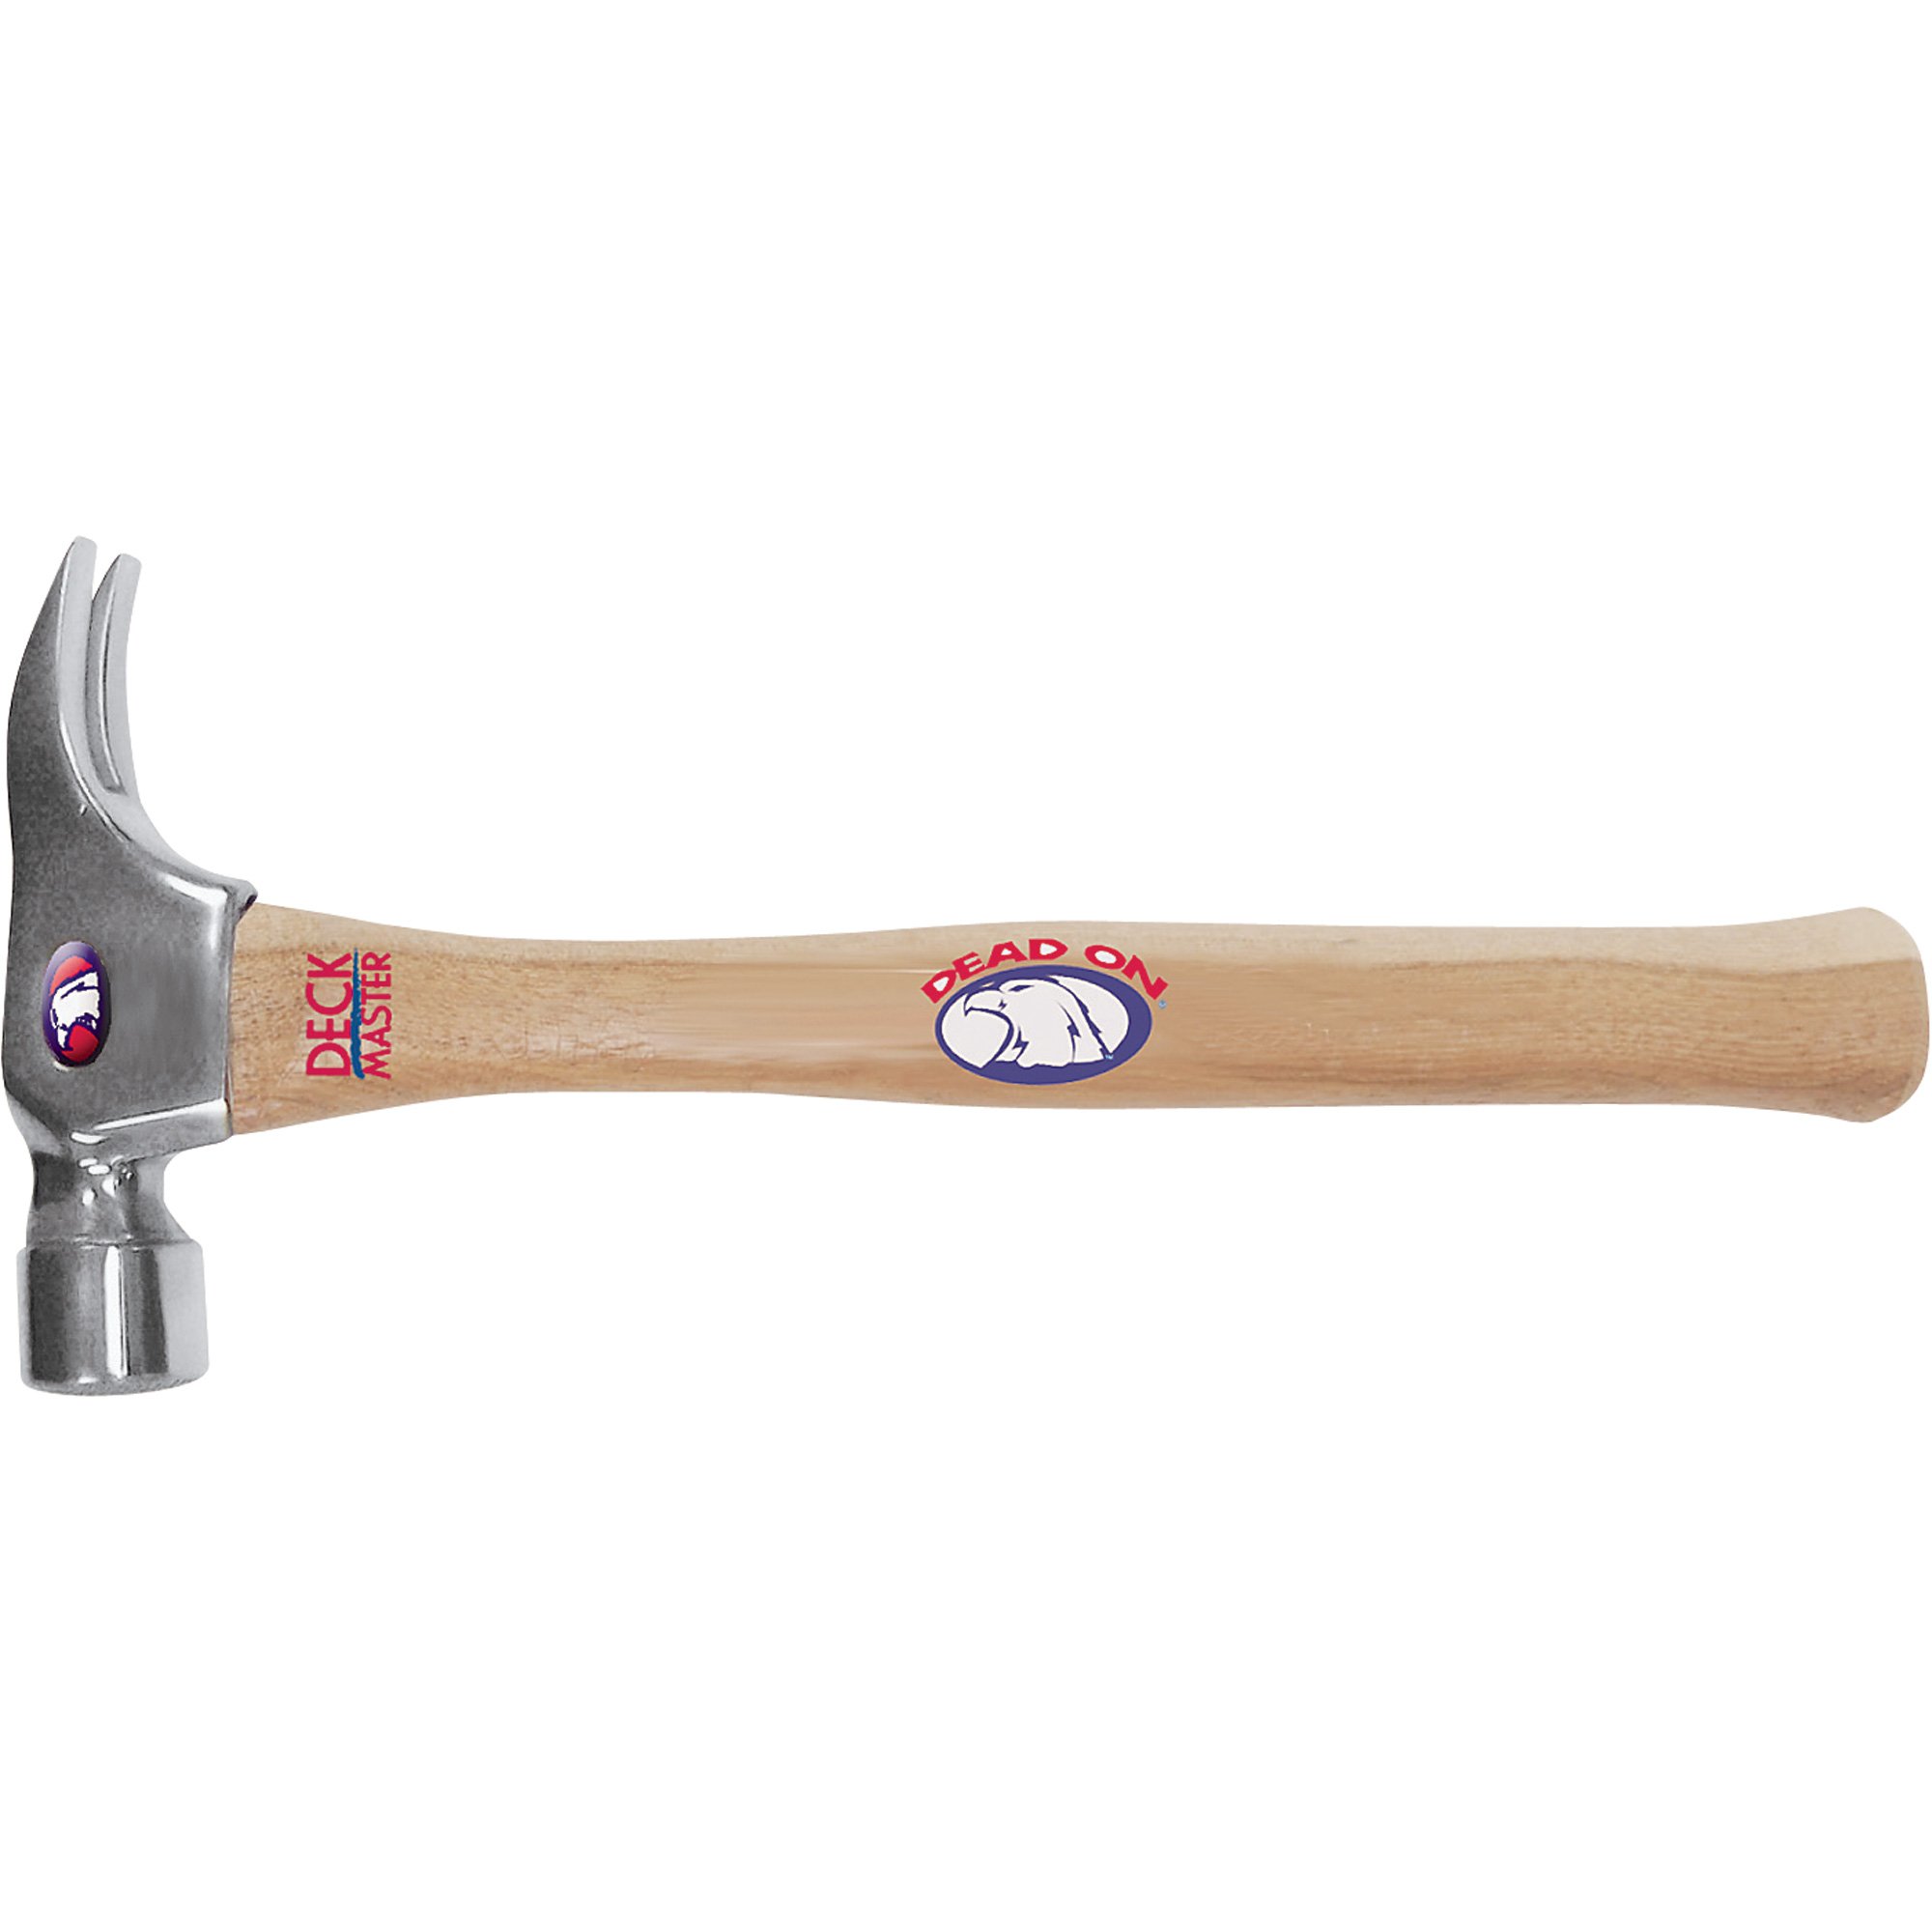 Blunt Force Smooth Face Hammer – Hardcore Hammers